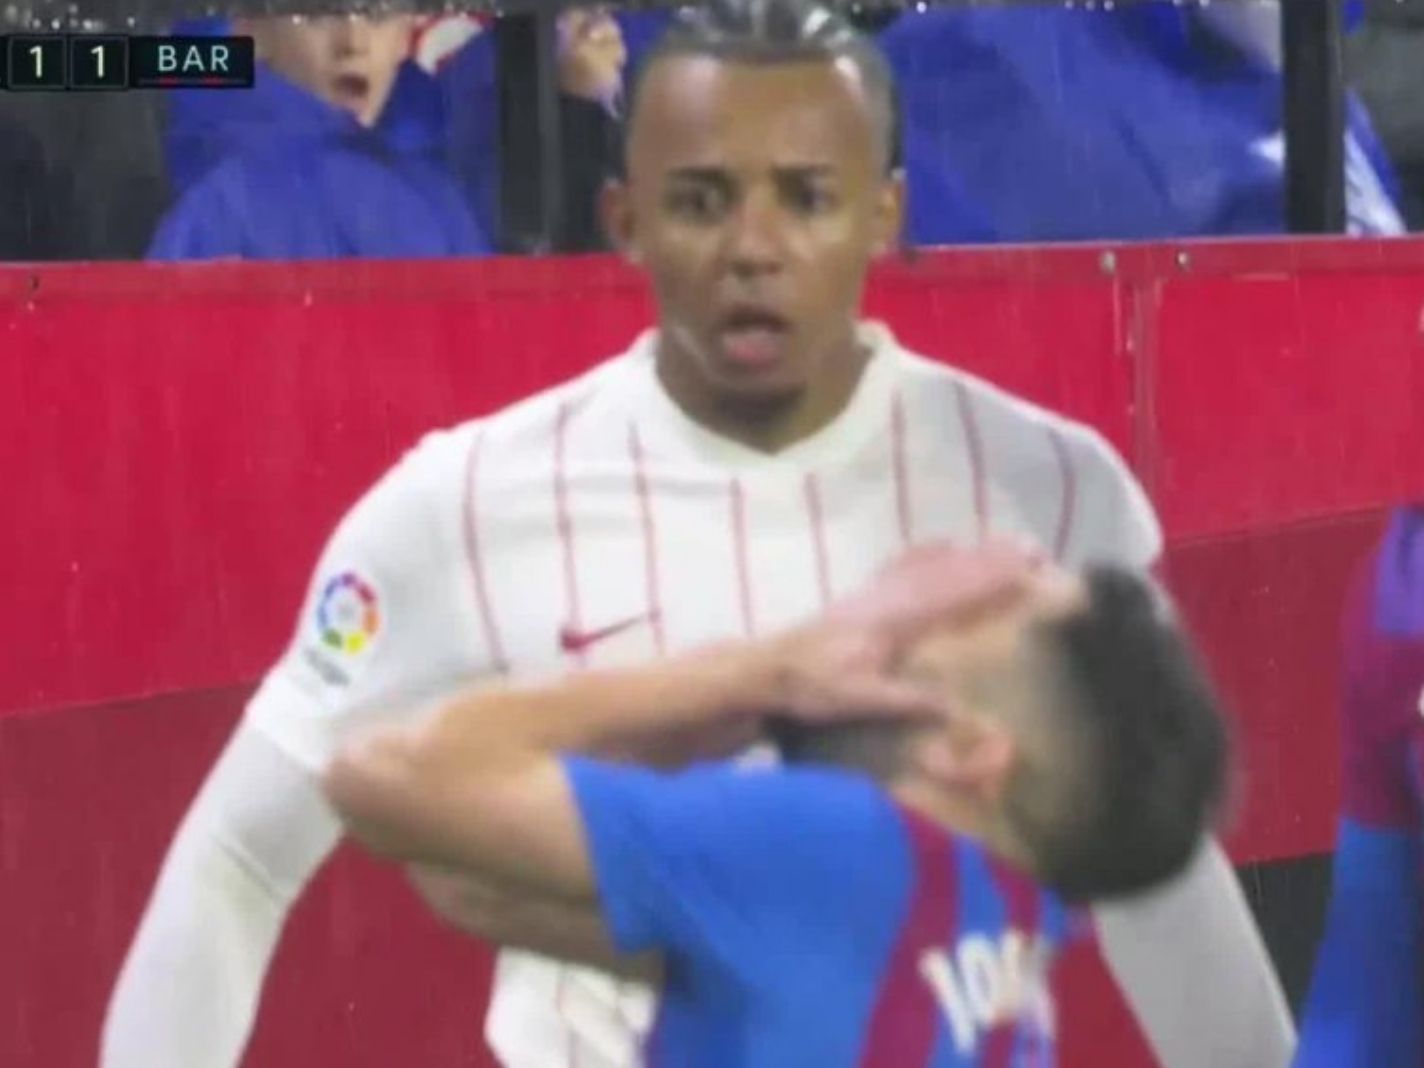 Jules Kounde was sent off for smacking the ball on Jordi Alba's face